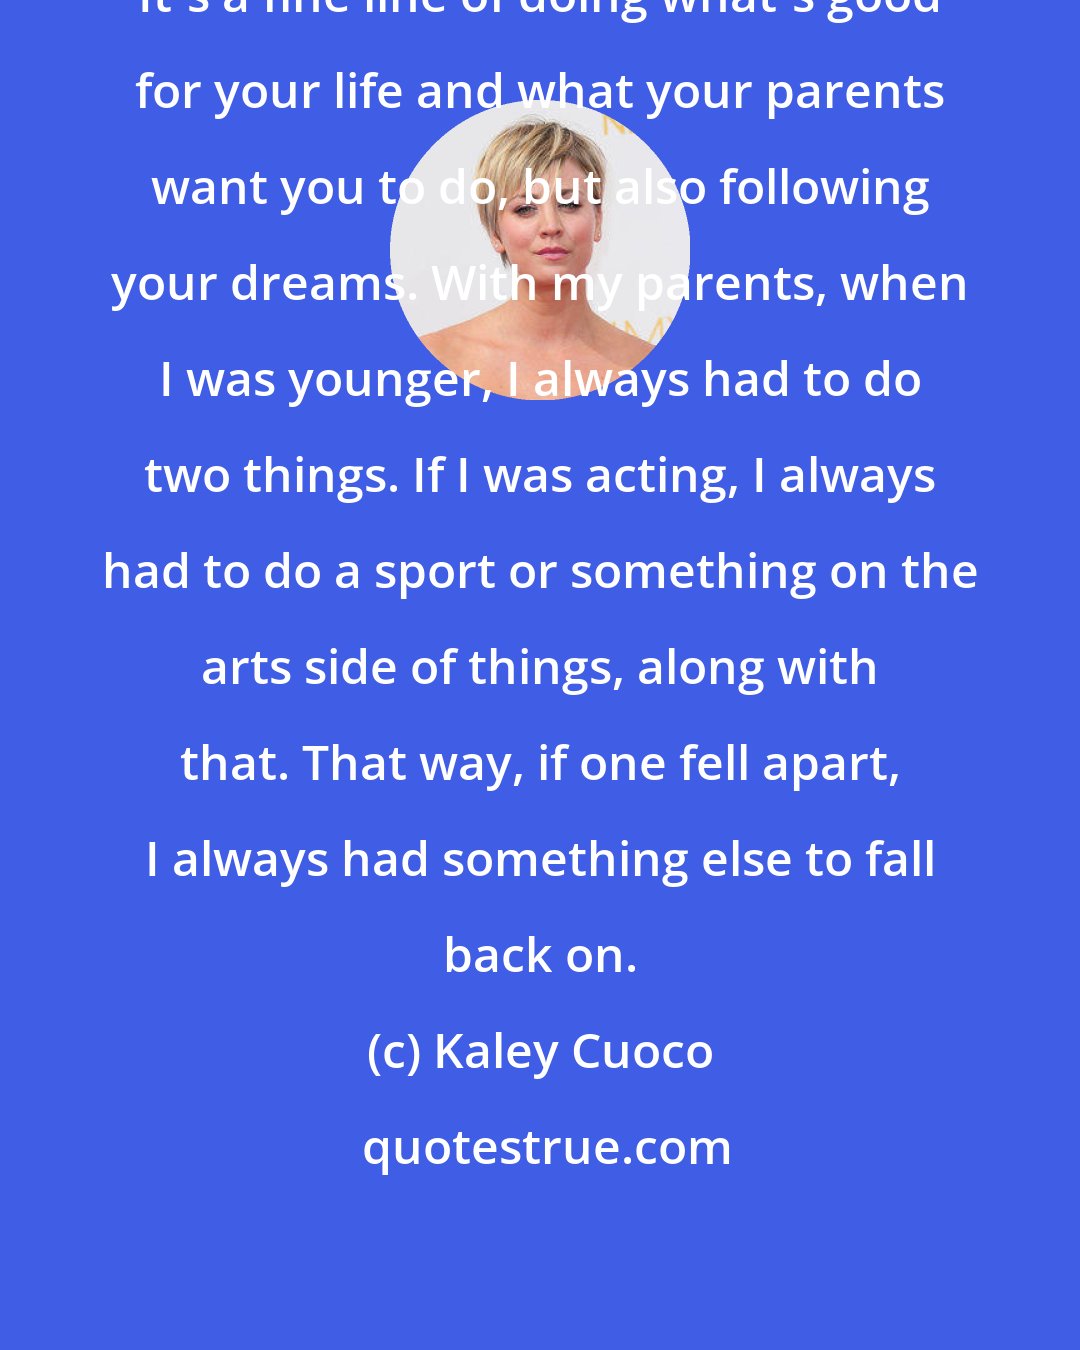 Kaley Cuoco: It's a fine line of doing what's good for your life and what your parents want you to do, but also following your dreams. With my parents, when I was younger, I always had to do two things. If I was acting, I always had to do a sport or something on the arts side of things, along with that. That way, if one fell apart, I always had something else to fall back on.